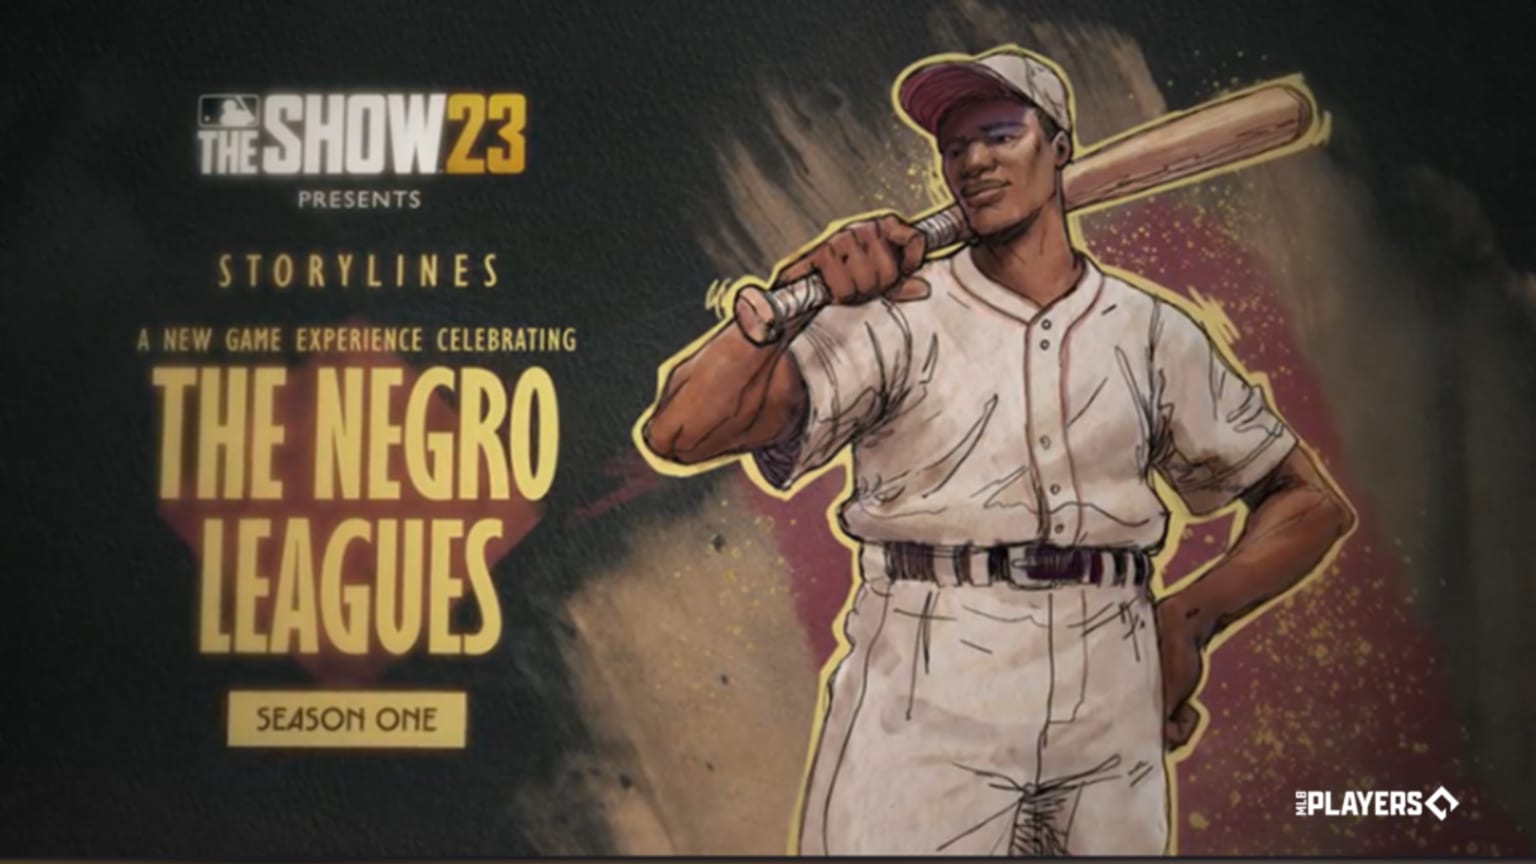 An illustration of a Negro Leagues player is shown next to text about the video game MLB The Show 23